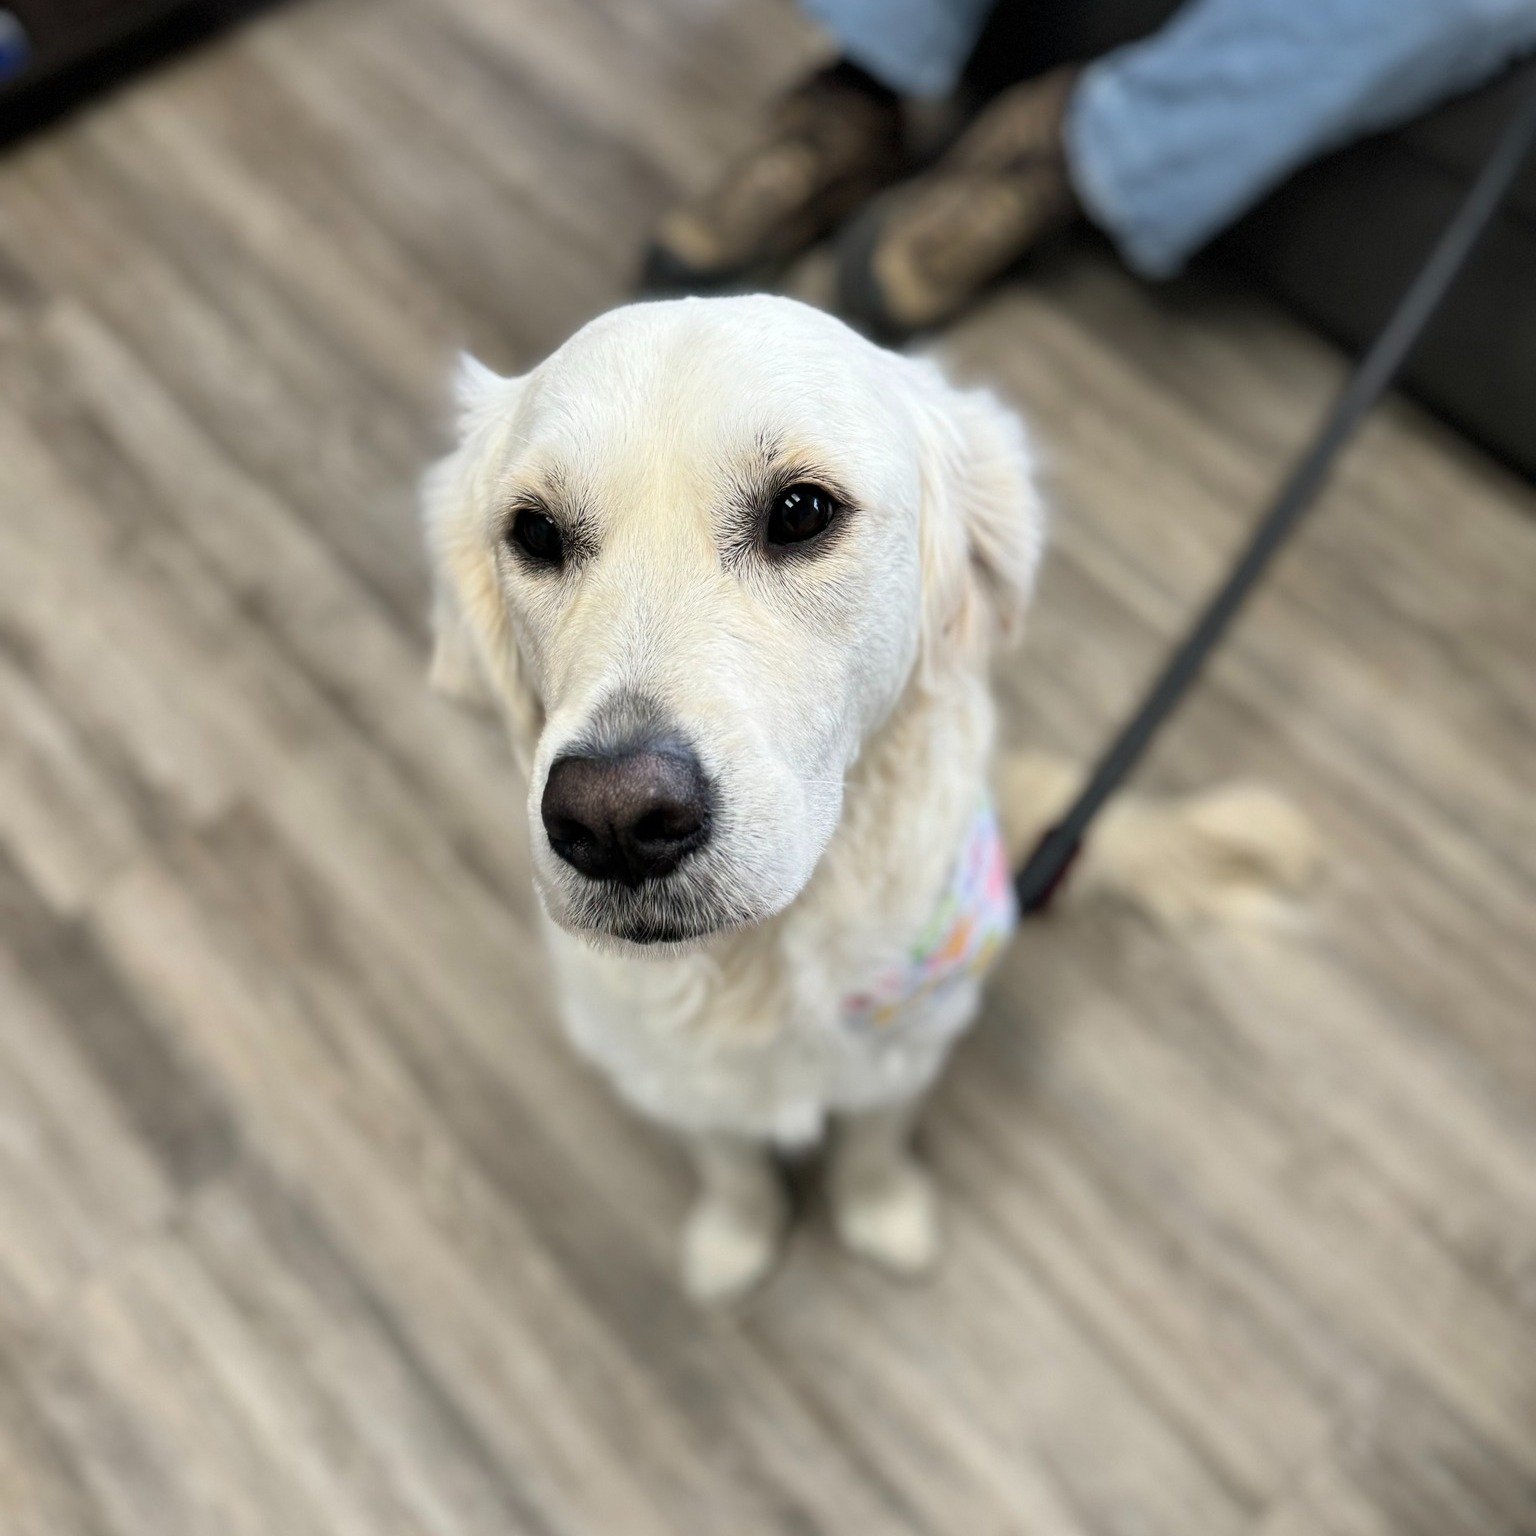 ✨Pet of The Week✨

The extraordinaryOlivia! 🐾🌸

Olivia, the 2-year-old English Golden Retriever, is not just your ordinary pup &ndash; she's a certified therapy dog spreading love and comfort wherever she goes!

 💖 Her mom couldn't be prouder, sha